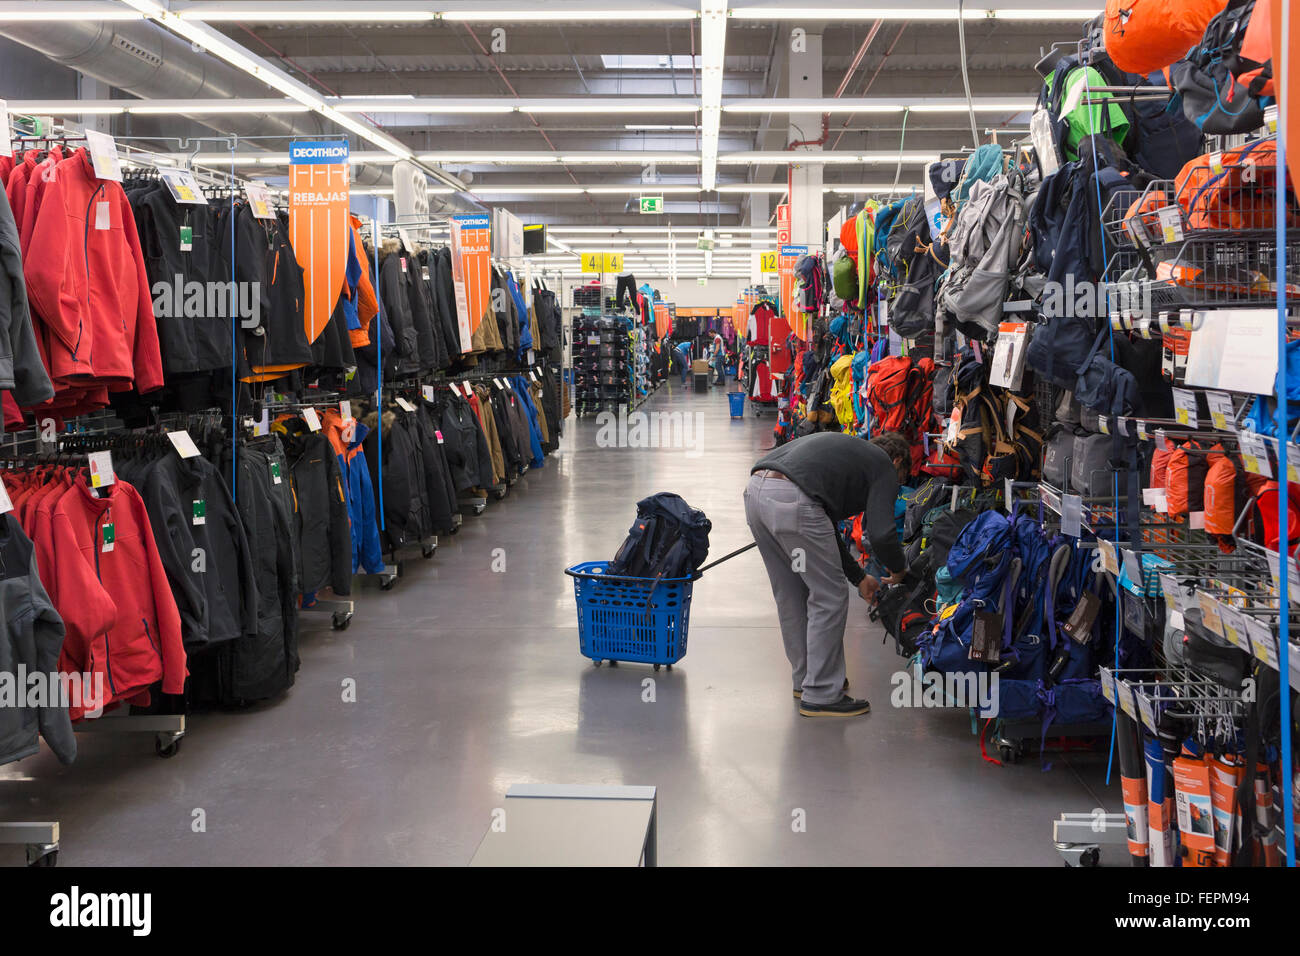 Malaga, Costa del Sol, Malaga Province, Andalusia, southern Spain. Decathlon  sports and sports clothing store interior Stock Photo - Alamy